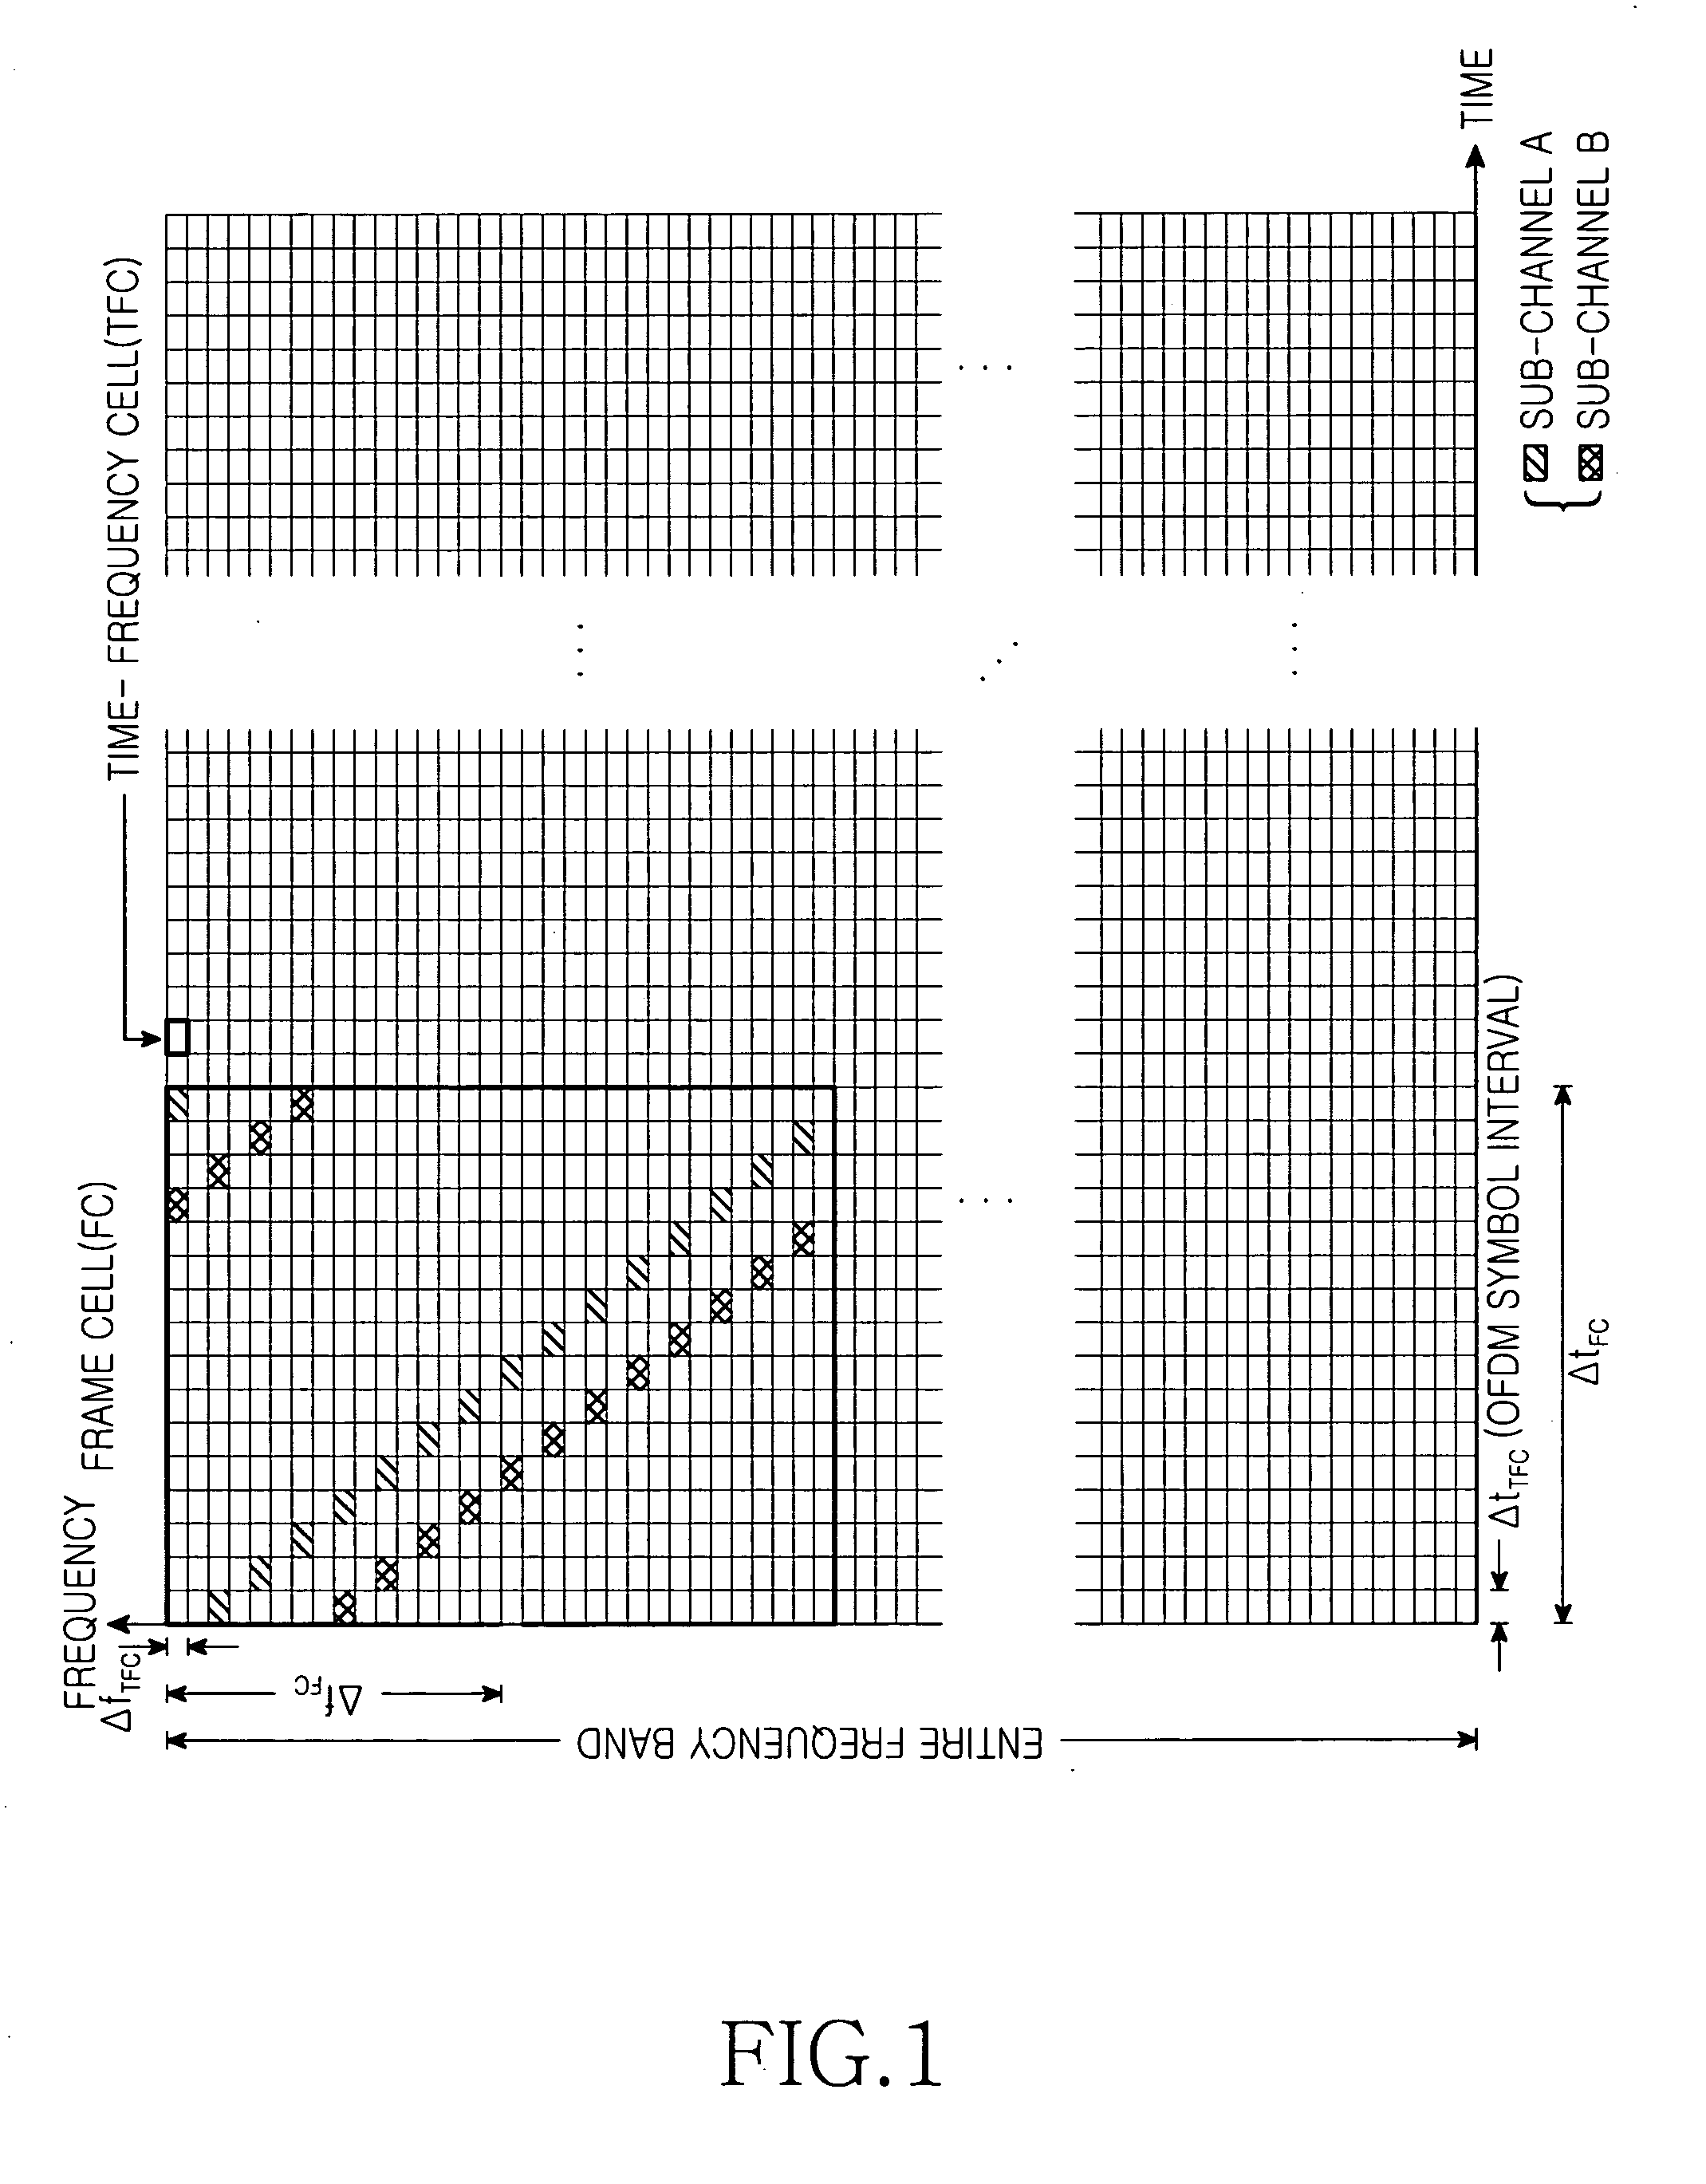 Apparatus and method for cell search in mobile communication system using a multiple access scheme